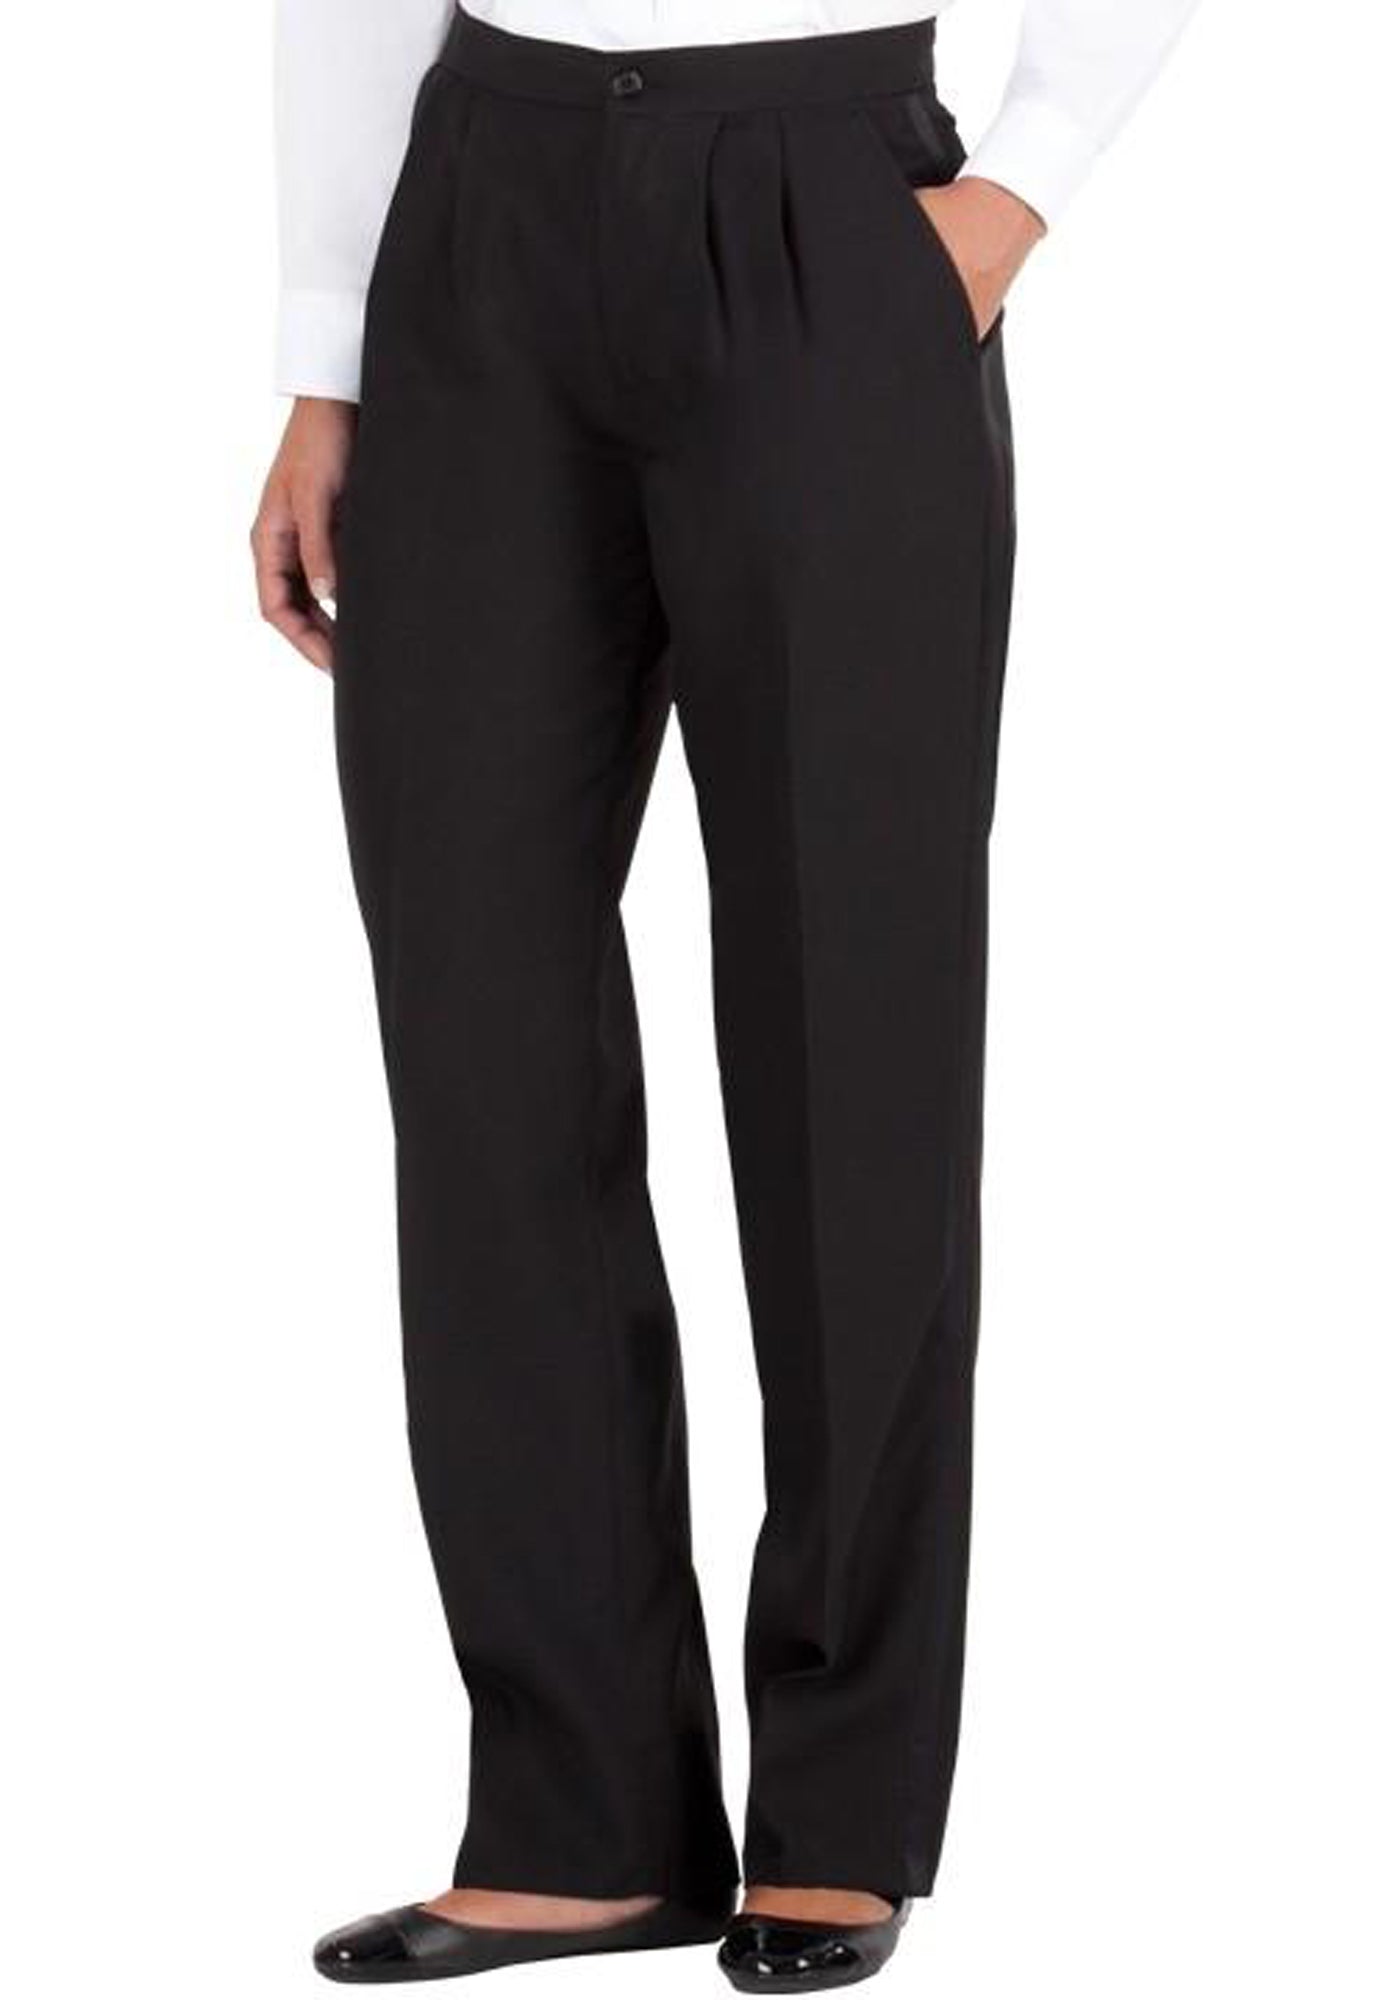 Women's Black, Flat Front, Contemporary Low Rise Tuxedo Pants with ...